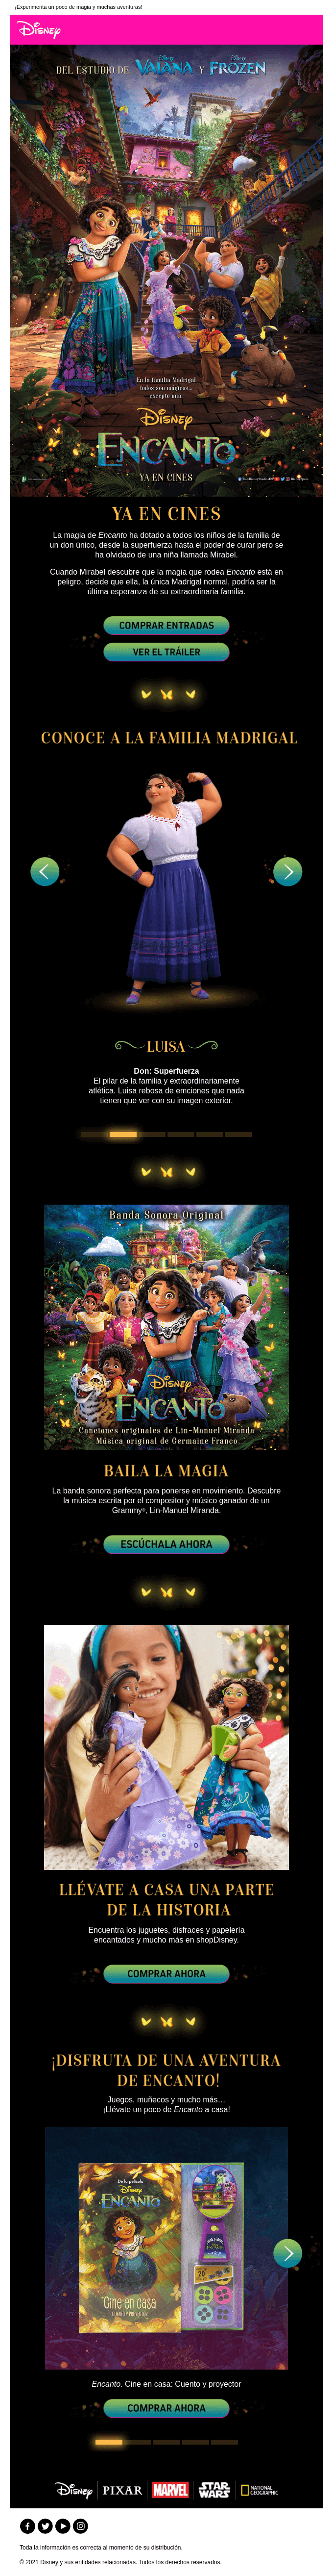 Encanto, now in theaters!